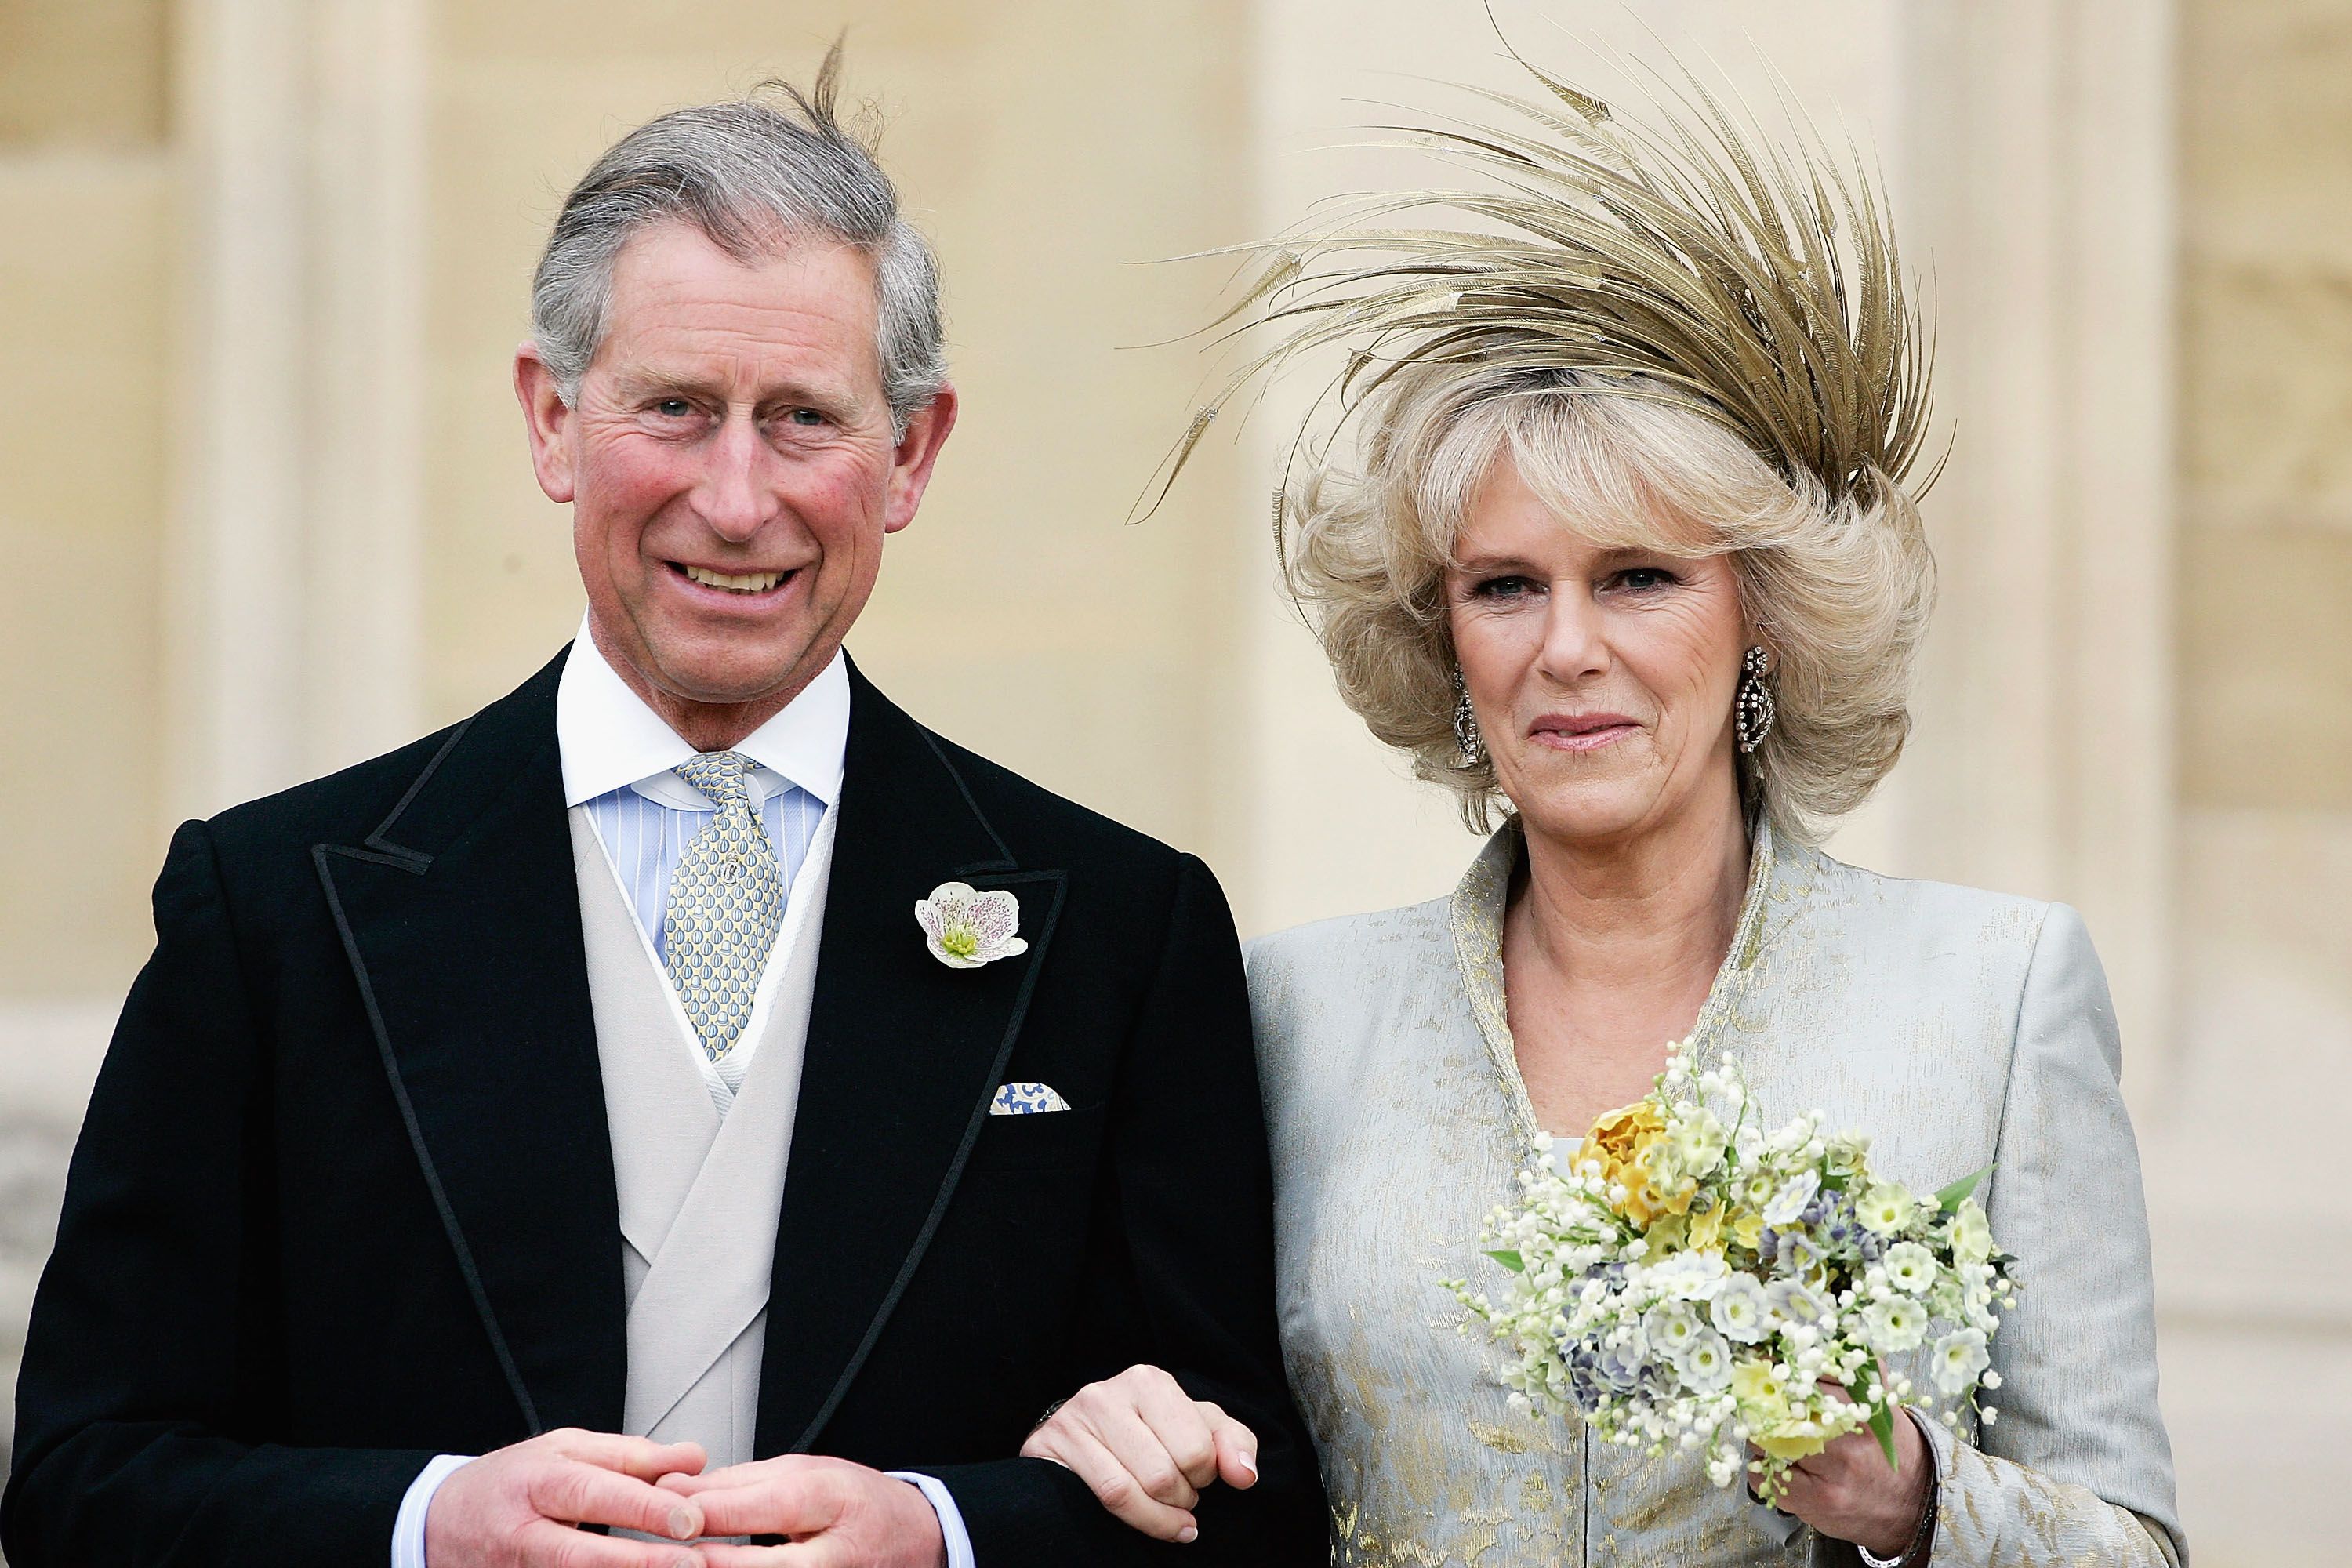 Prince Charles and The Duchess Of Cornwall on their wedding day, April 9, 2005 | Source: Getty Images